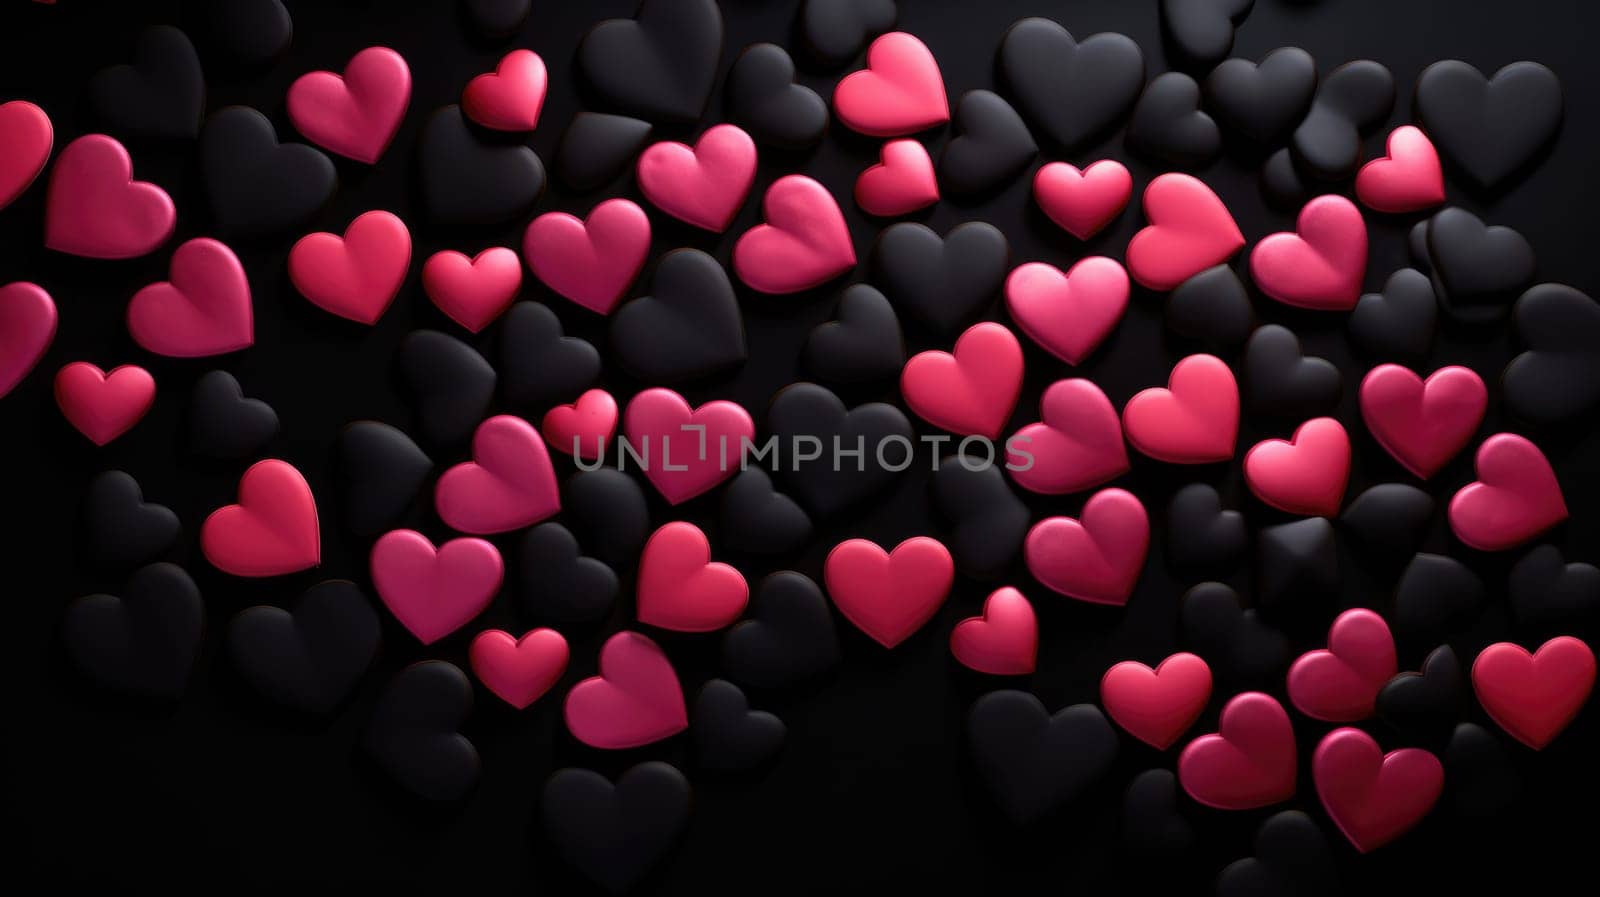 Pink and black heart shaped rocks on black background. Pile of white heart pebble, stone. Valentine's day. Heart shape of pebble on small peddles. by JuliaDorian